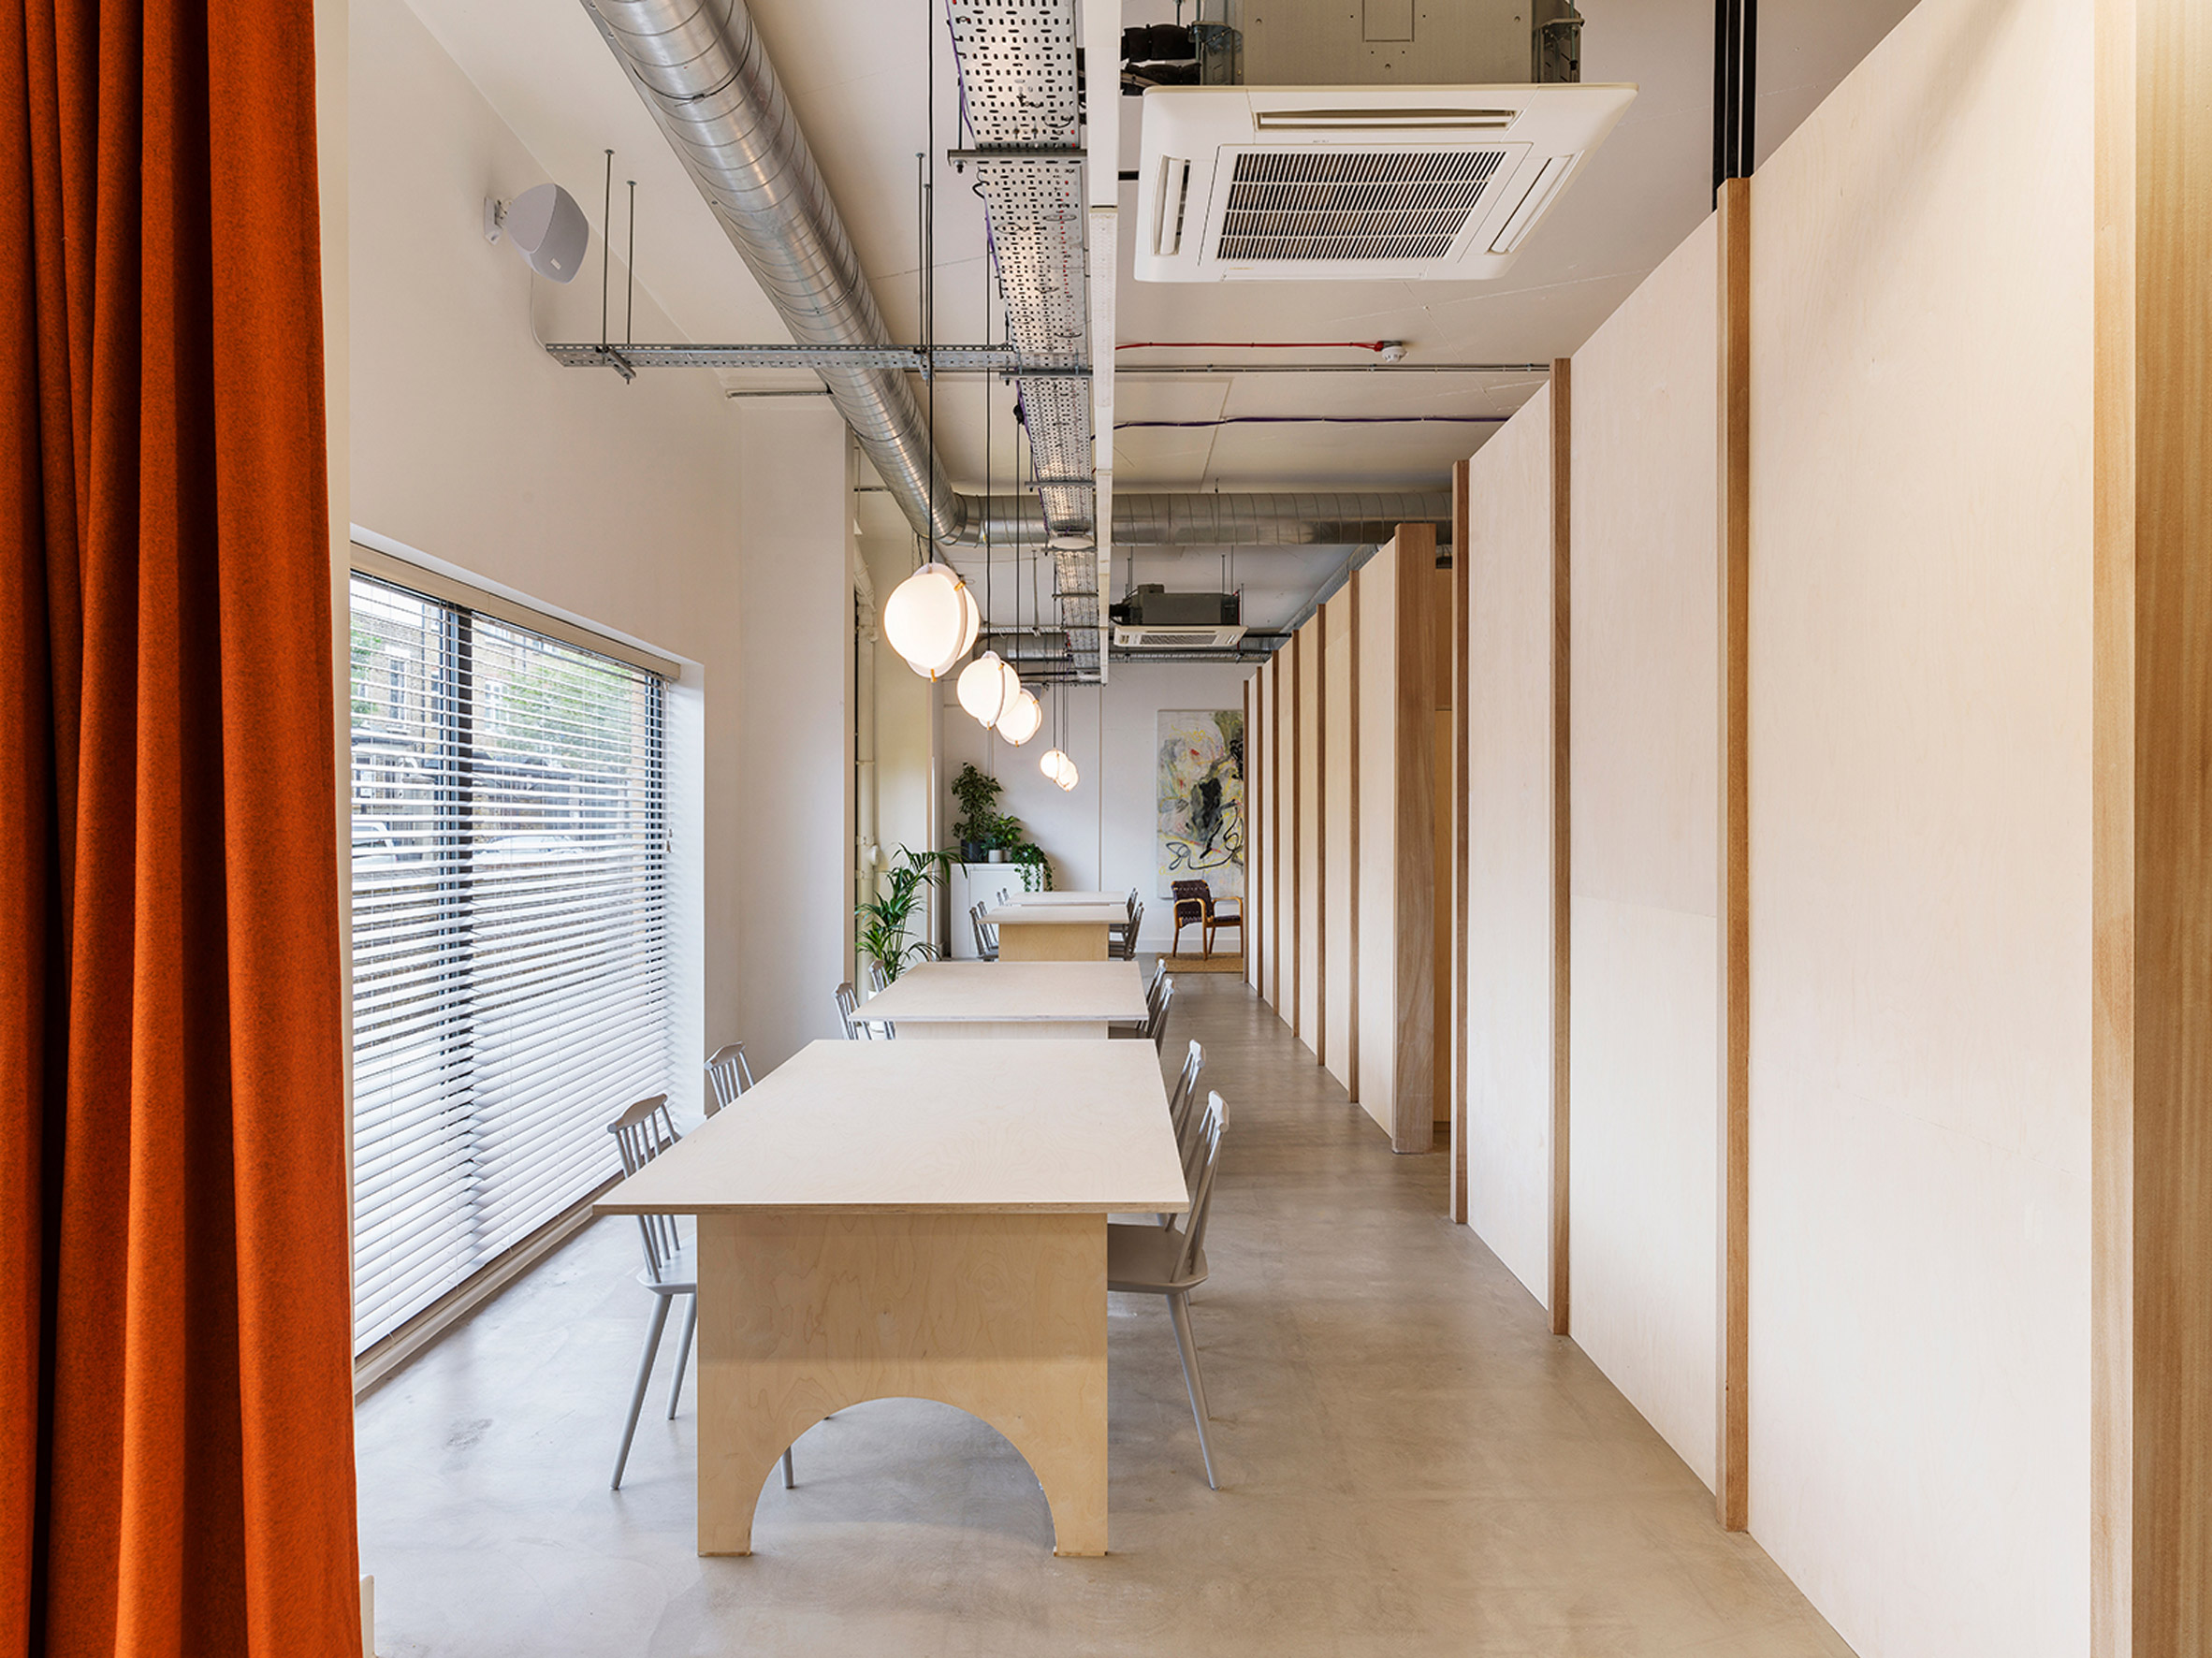 ARC Club is a stripped-back co-working space in east London